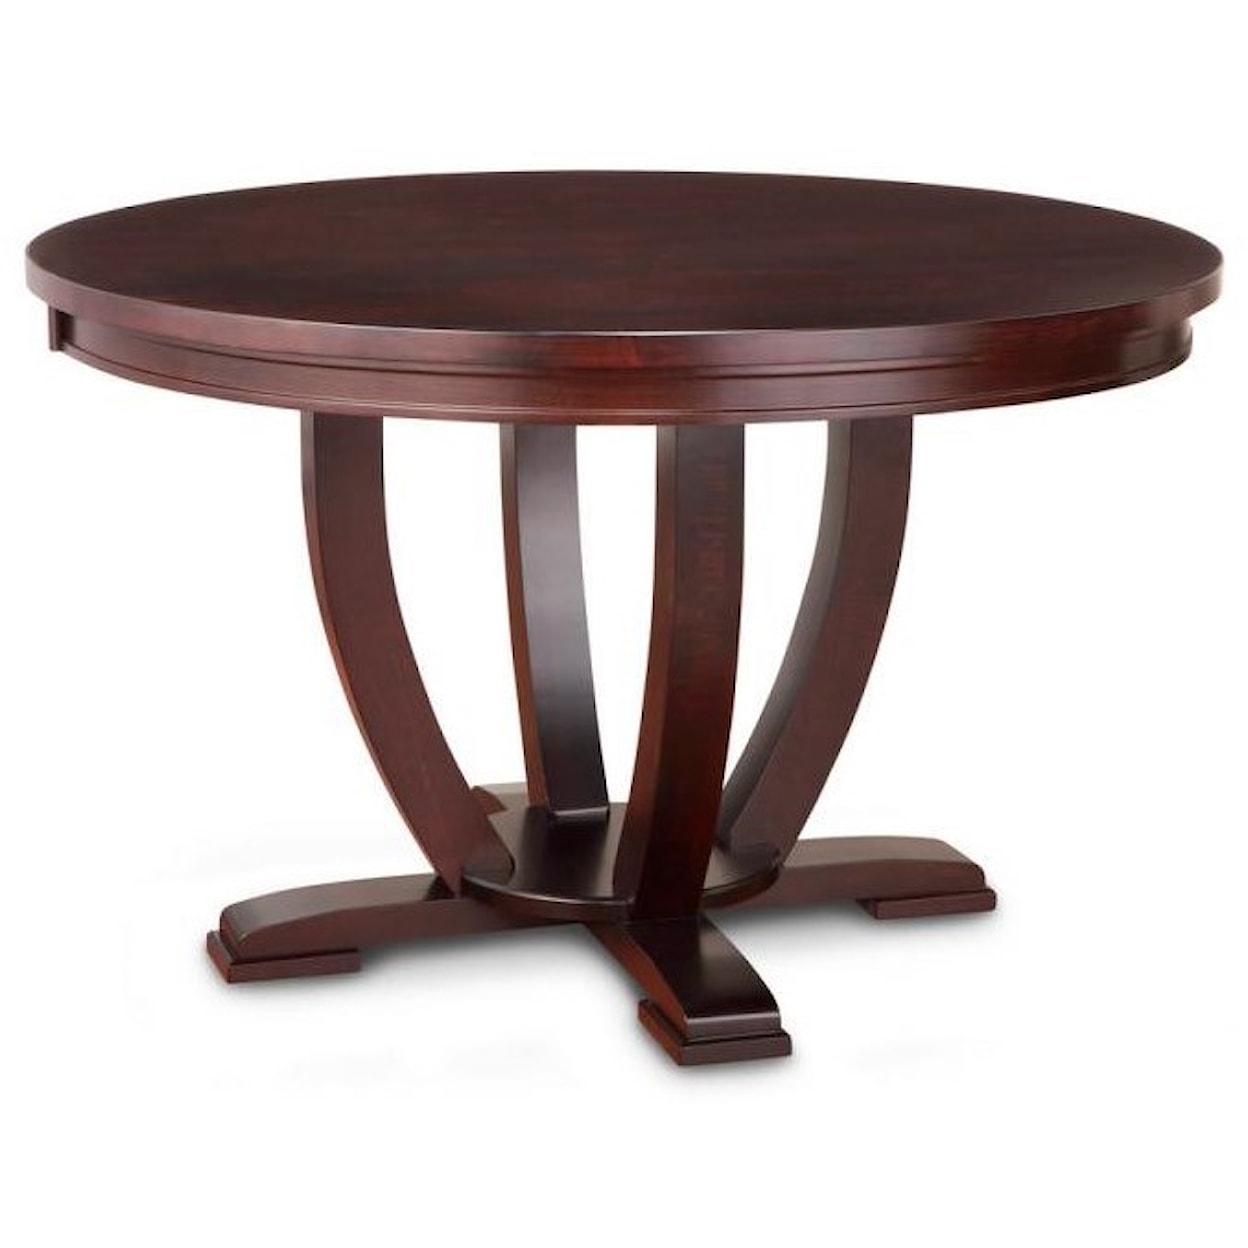 Handstone Florence 54" Round Dining Table